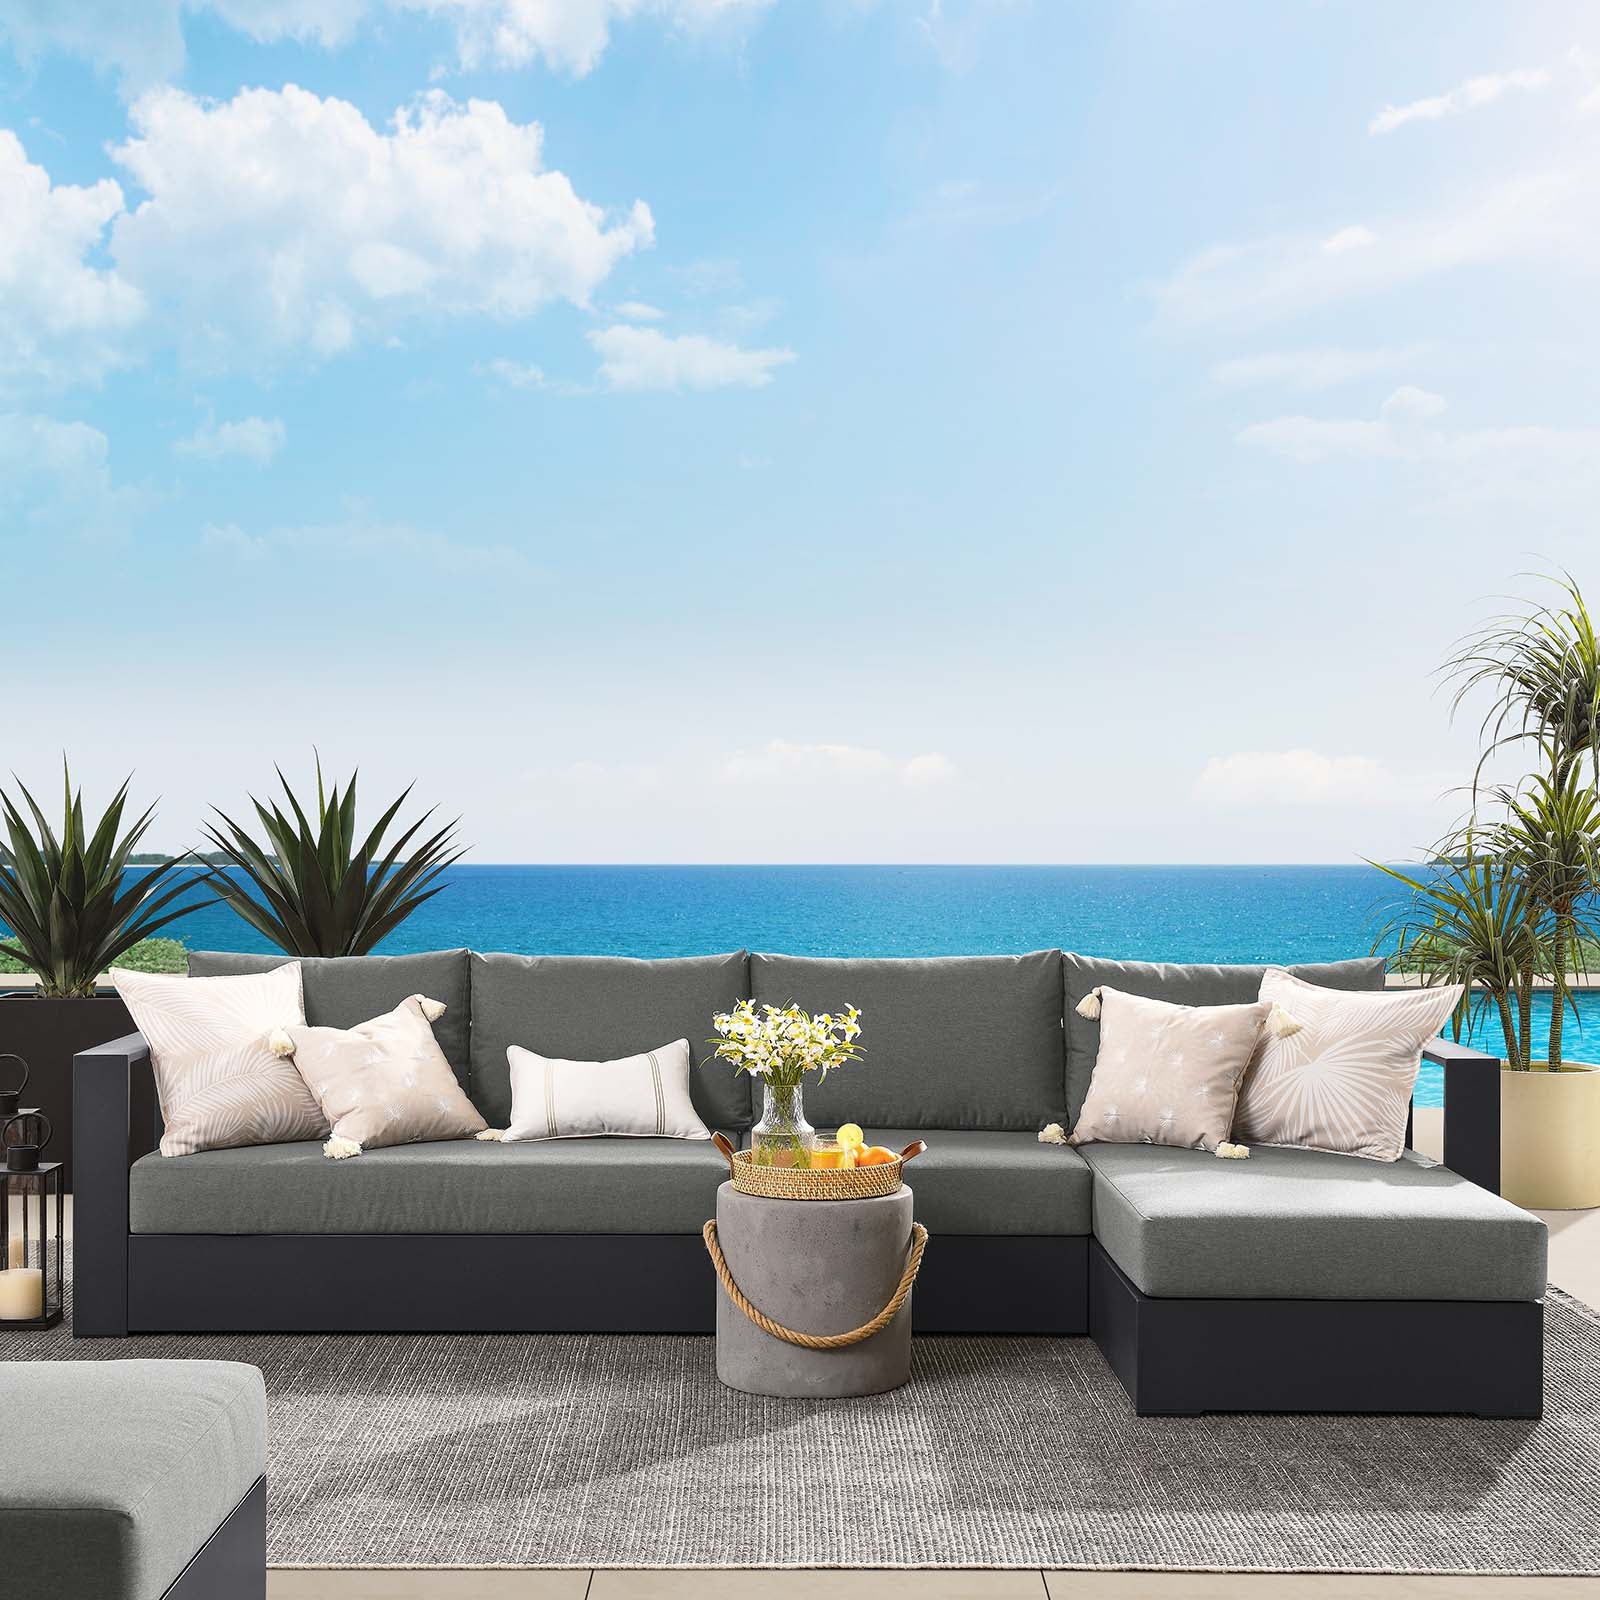 Tahoe Outdoor Patio Powder-Coated Aluminum 3-Piece Right-Facing Chaise Sectional Sofa Set